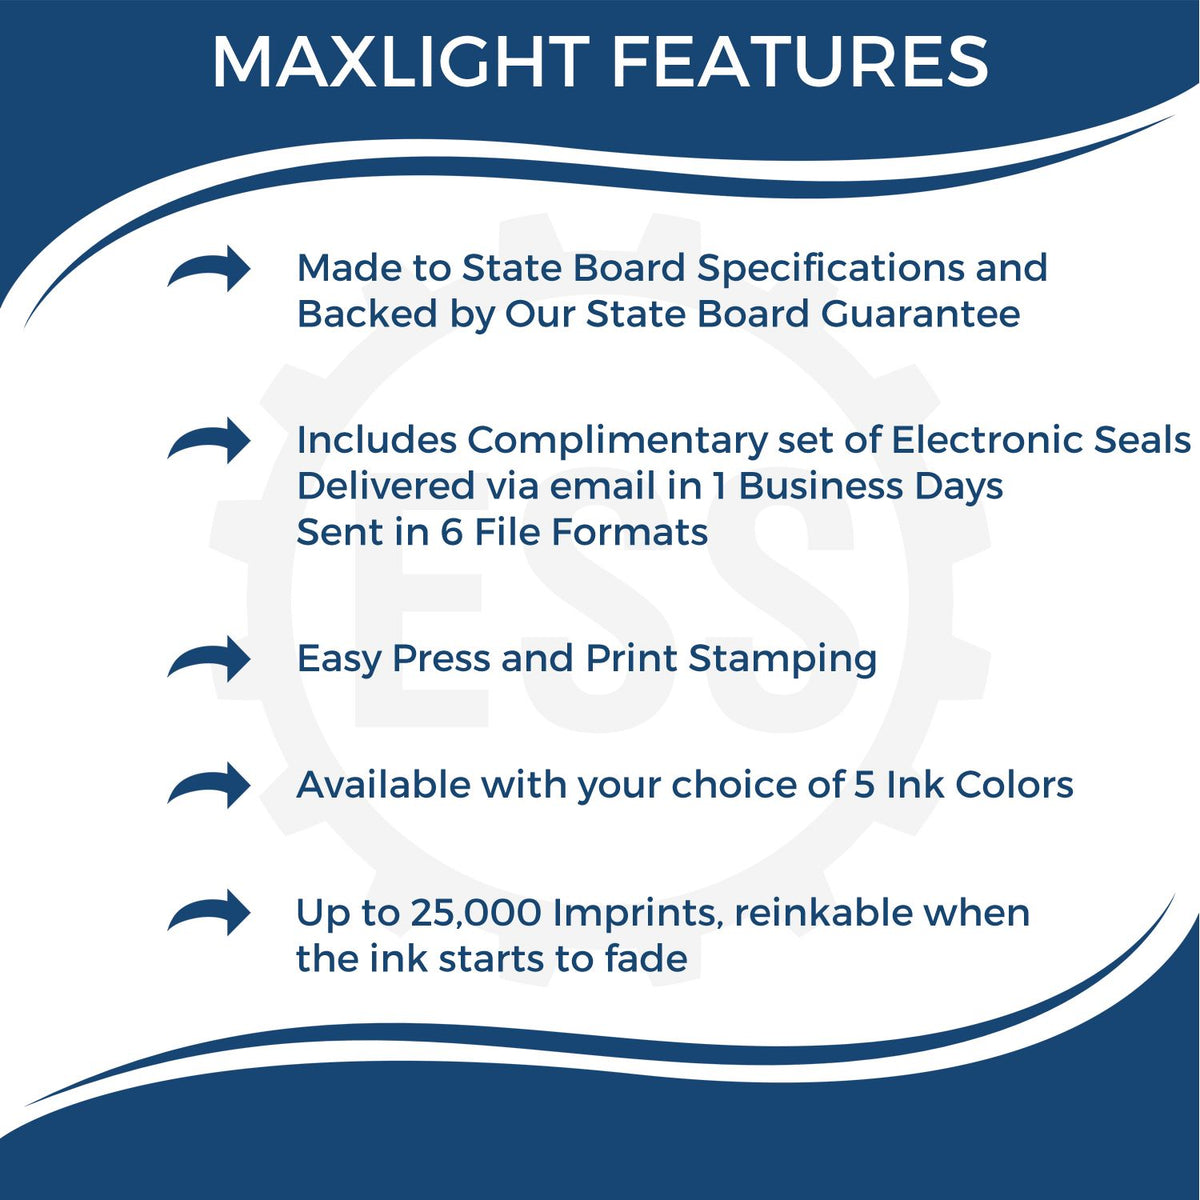 A picture of an infographic highlighting the selling points for the Premium MaxLight Pre-Inked Nebraska Engineering Stamp